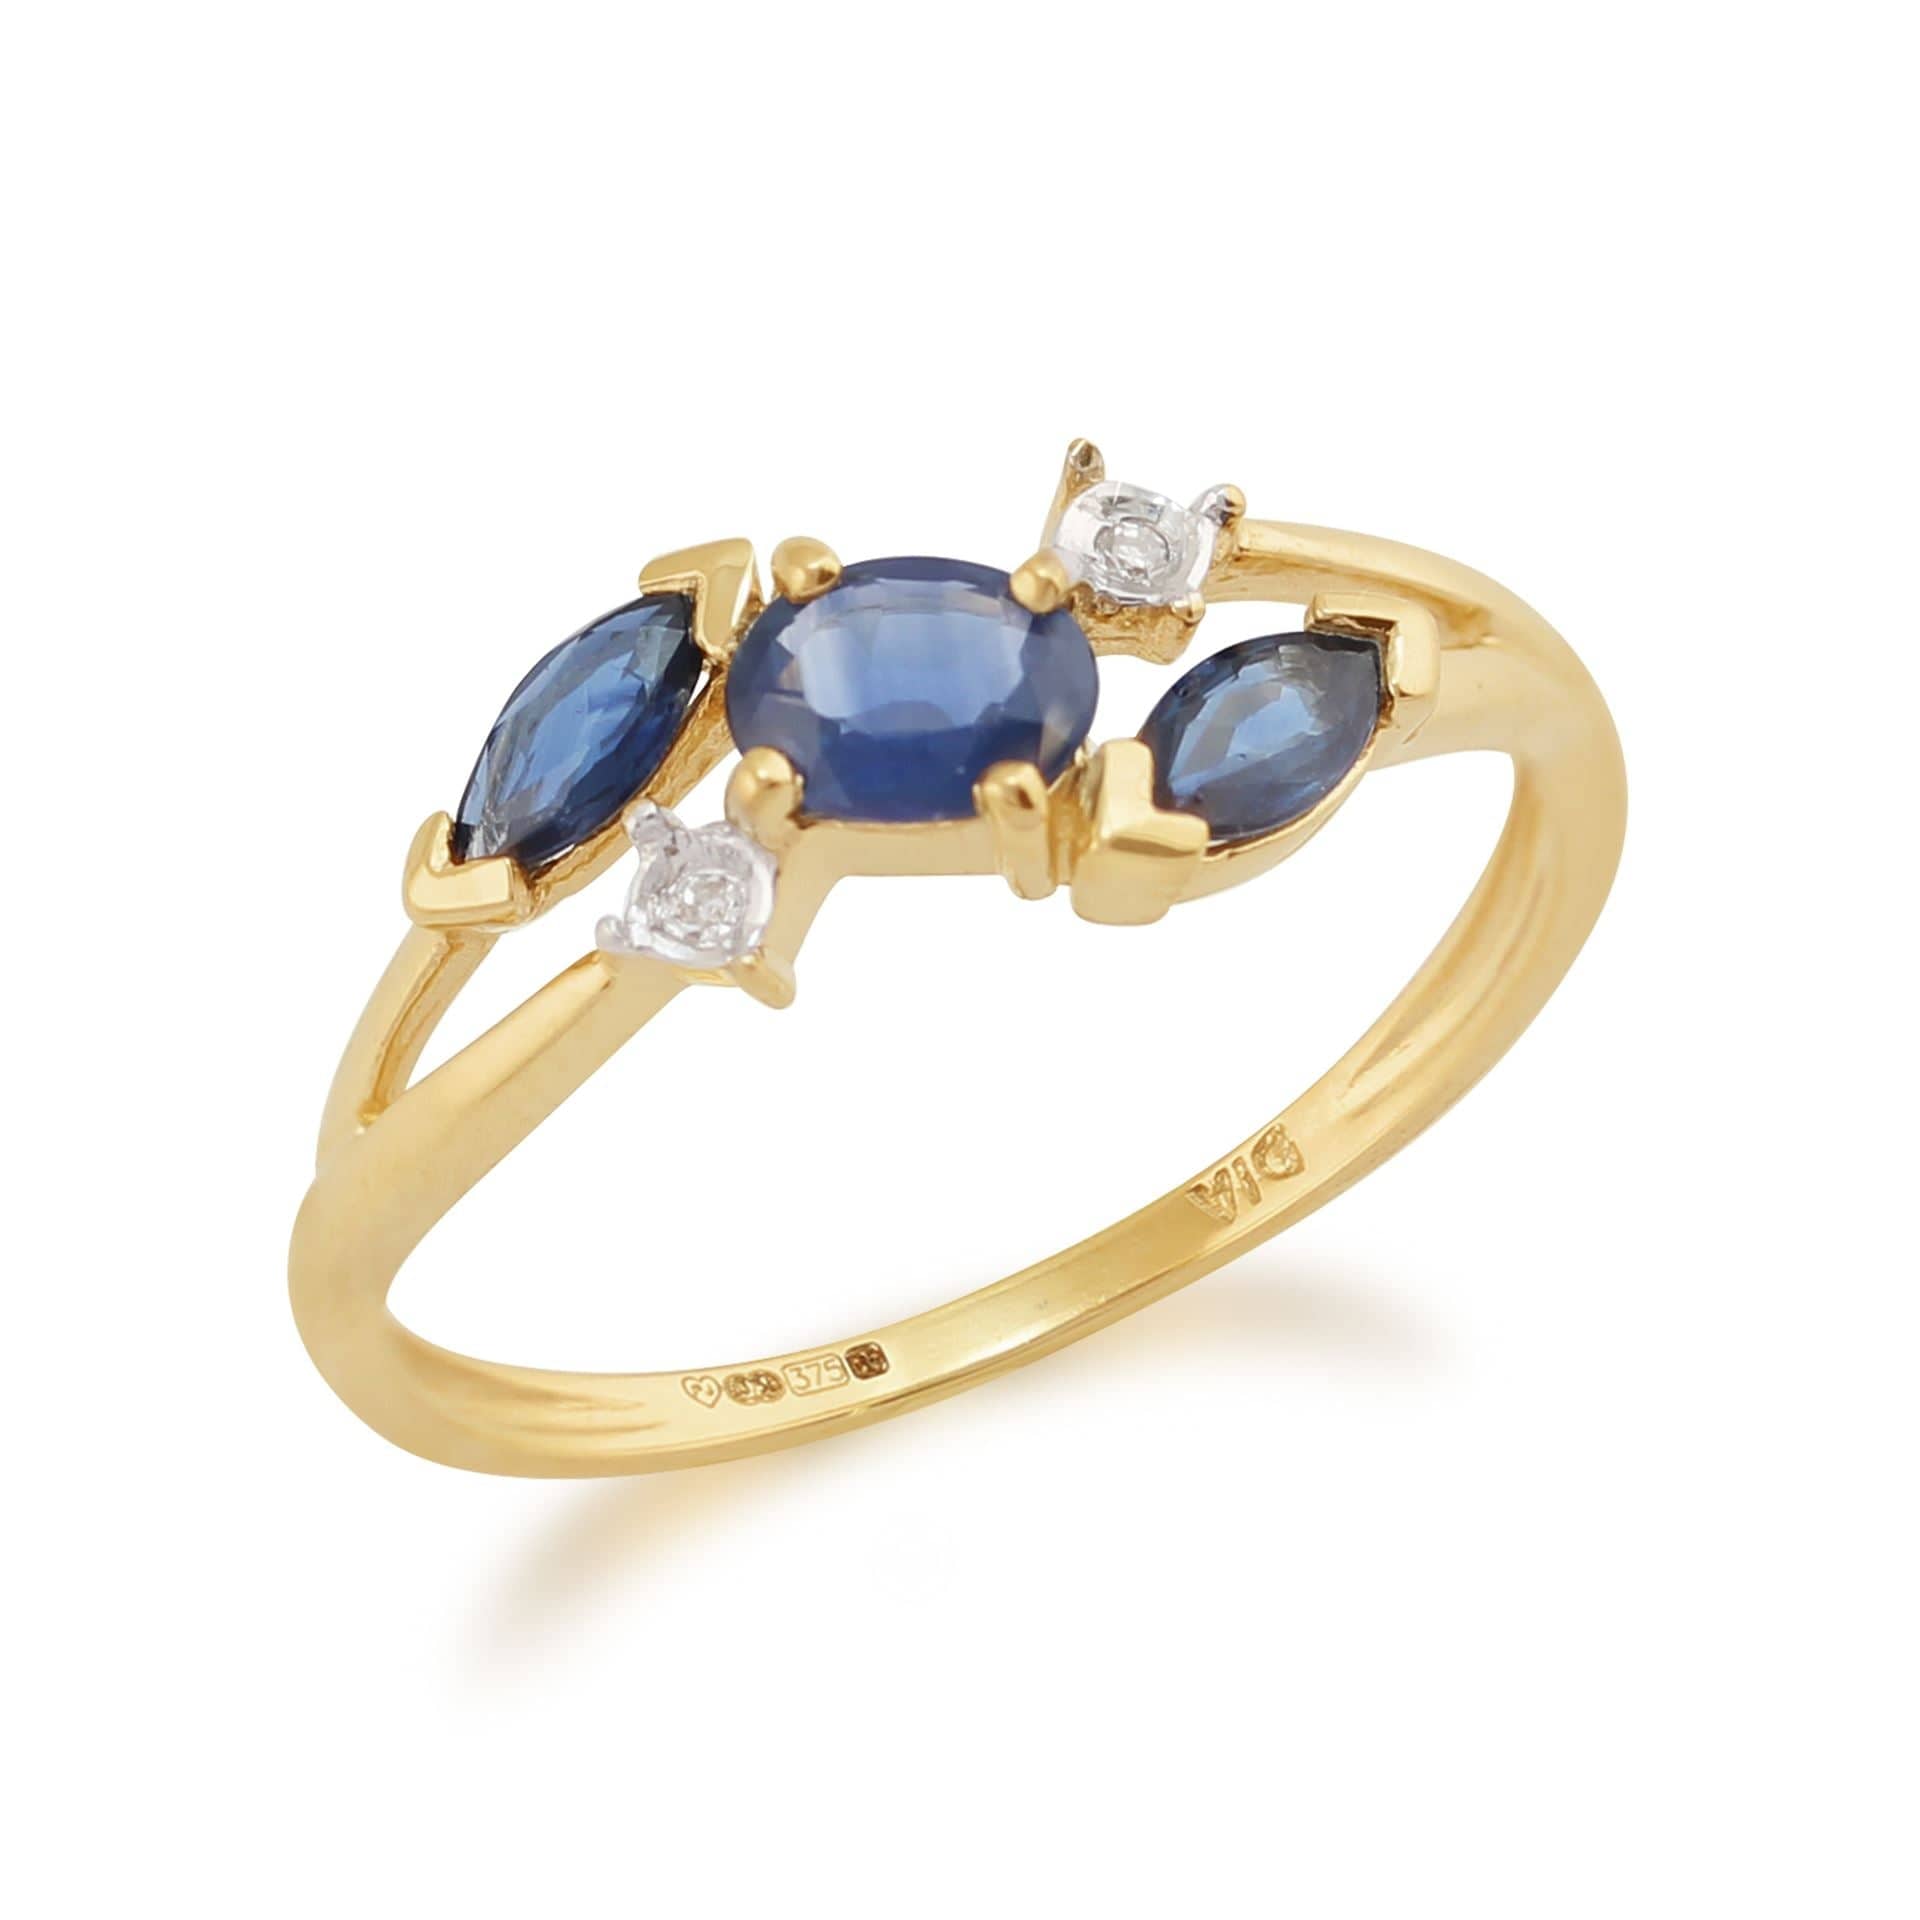 25343 Contemporary Marquise Light Blue Sapphire & Diamond Three Stone Ring in 9ct Yellow Gold 2